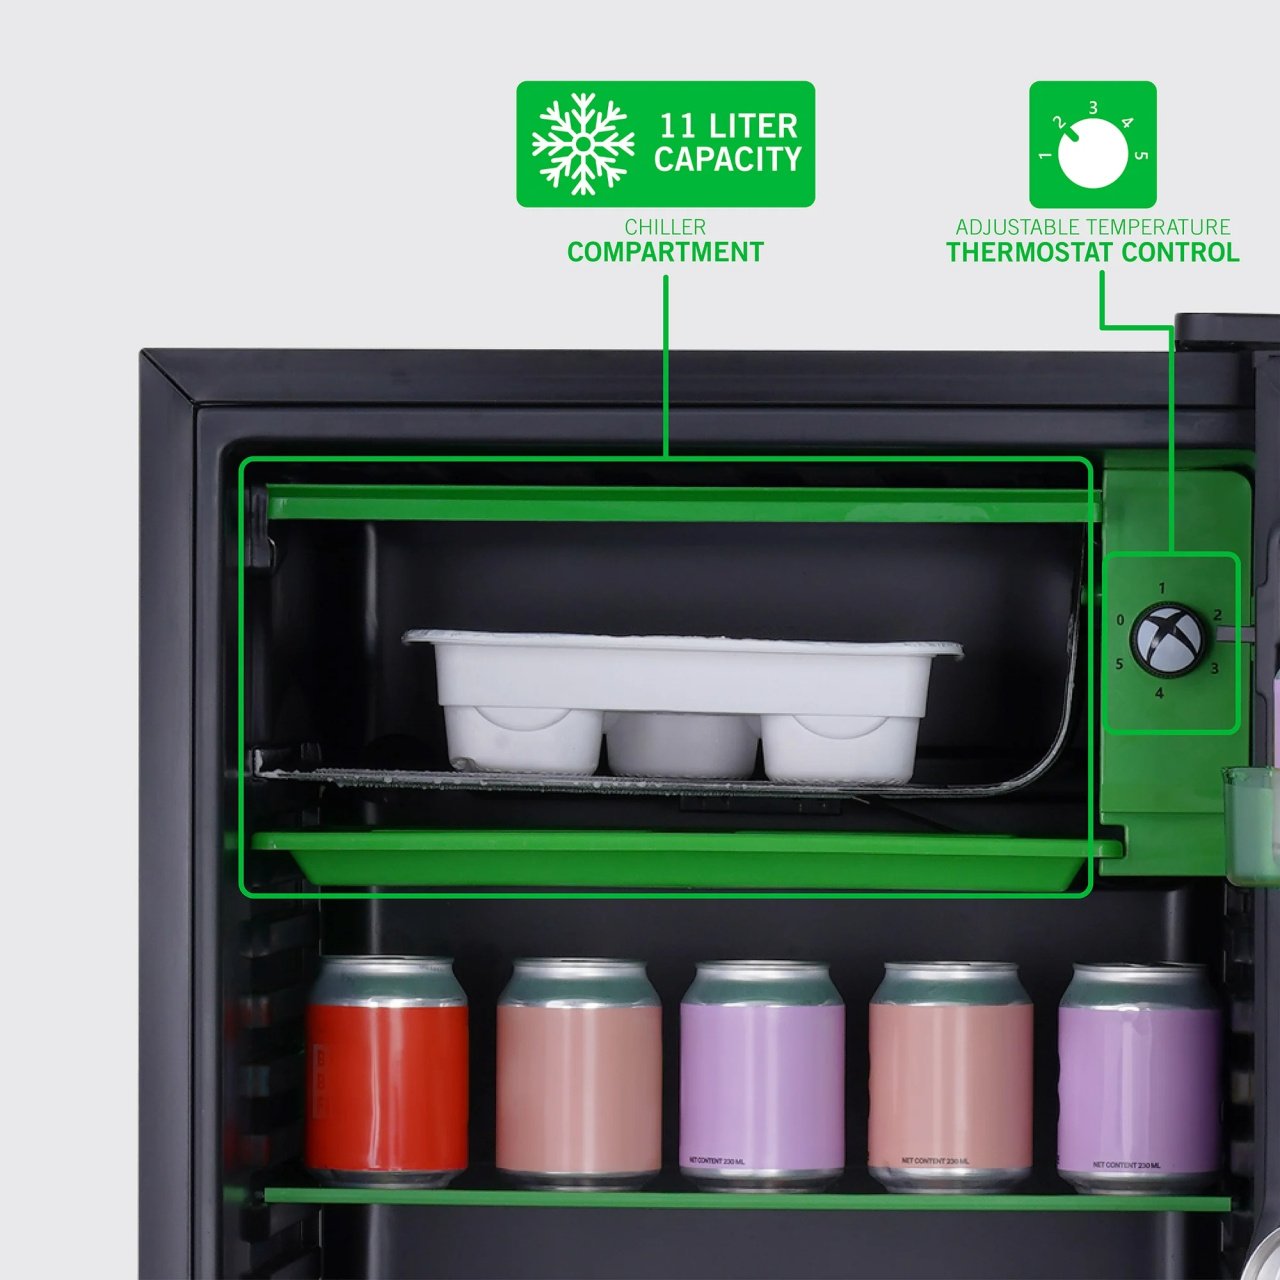 Xbox Has Created Another New Mini Fridge, And It's Easily The